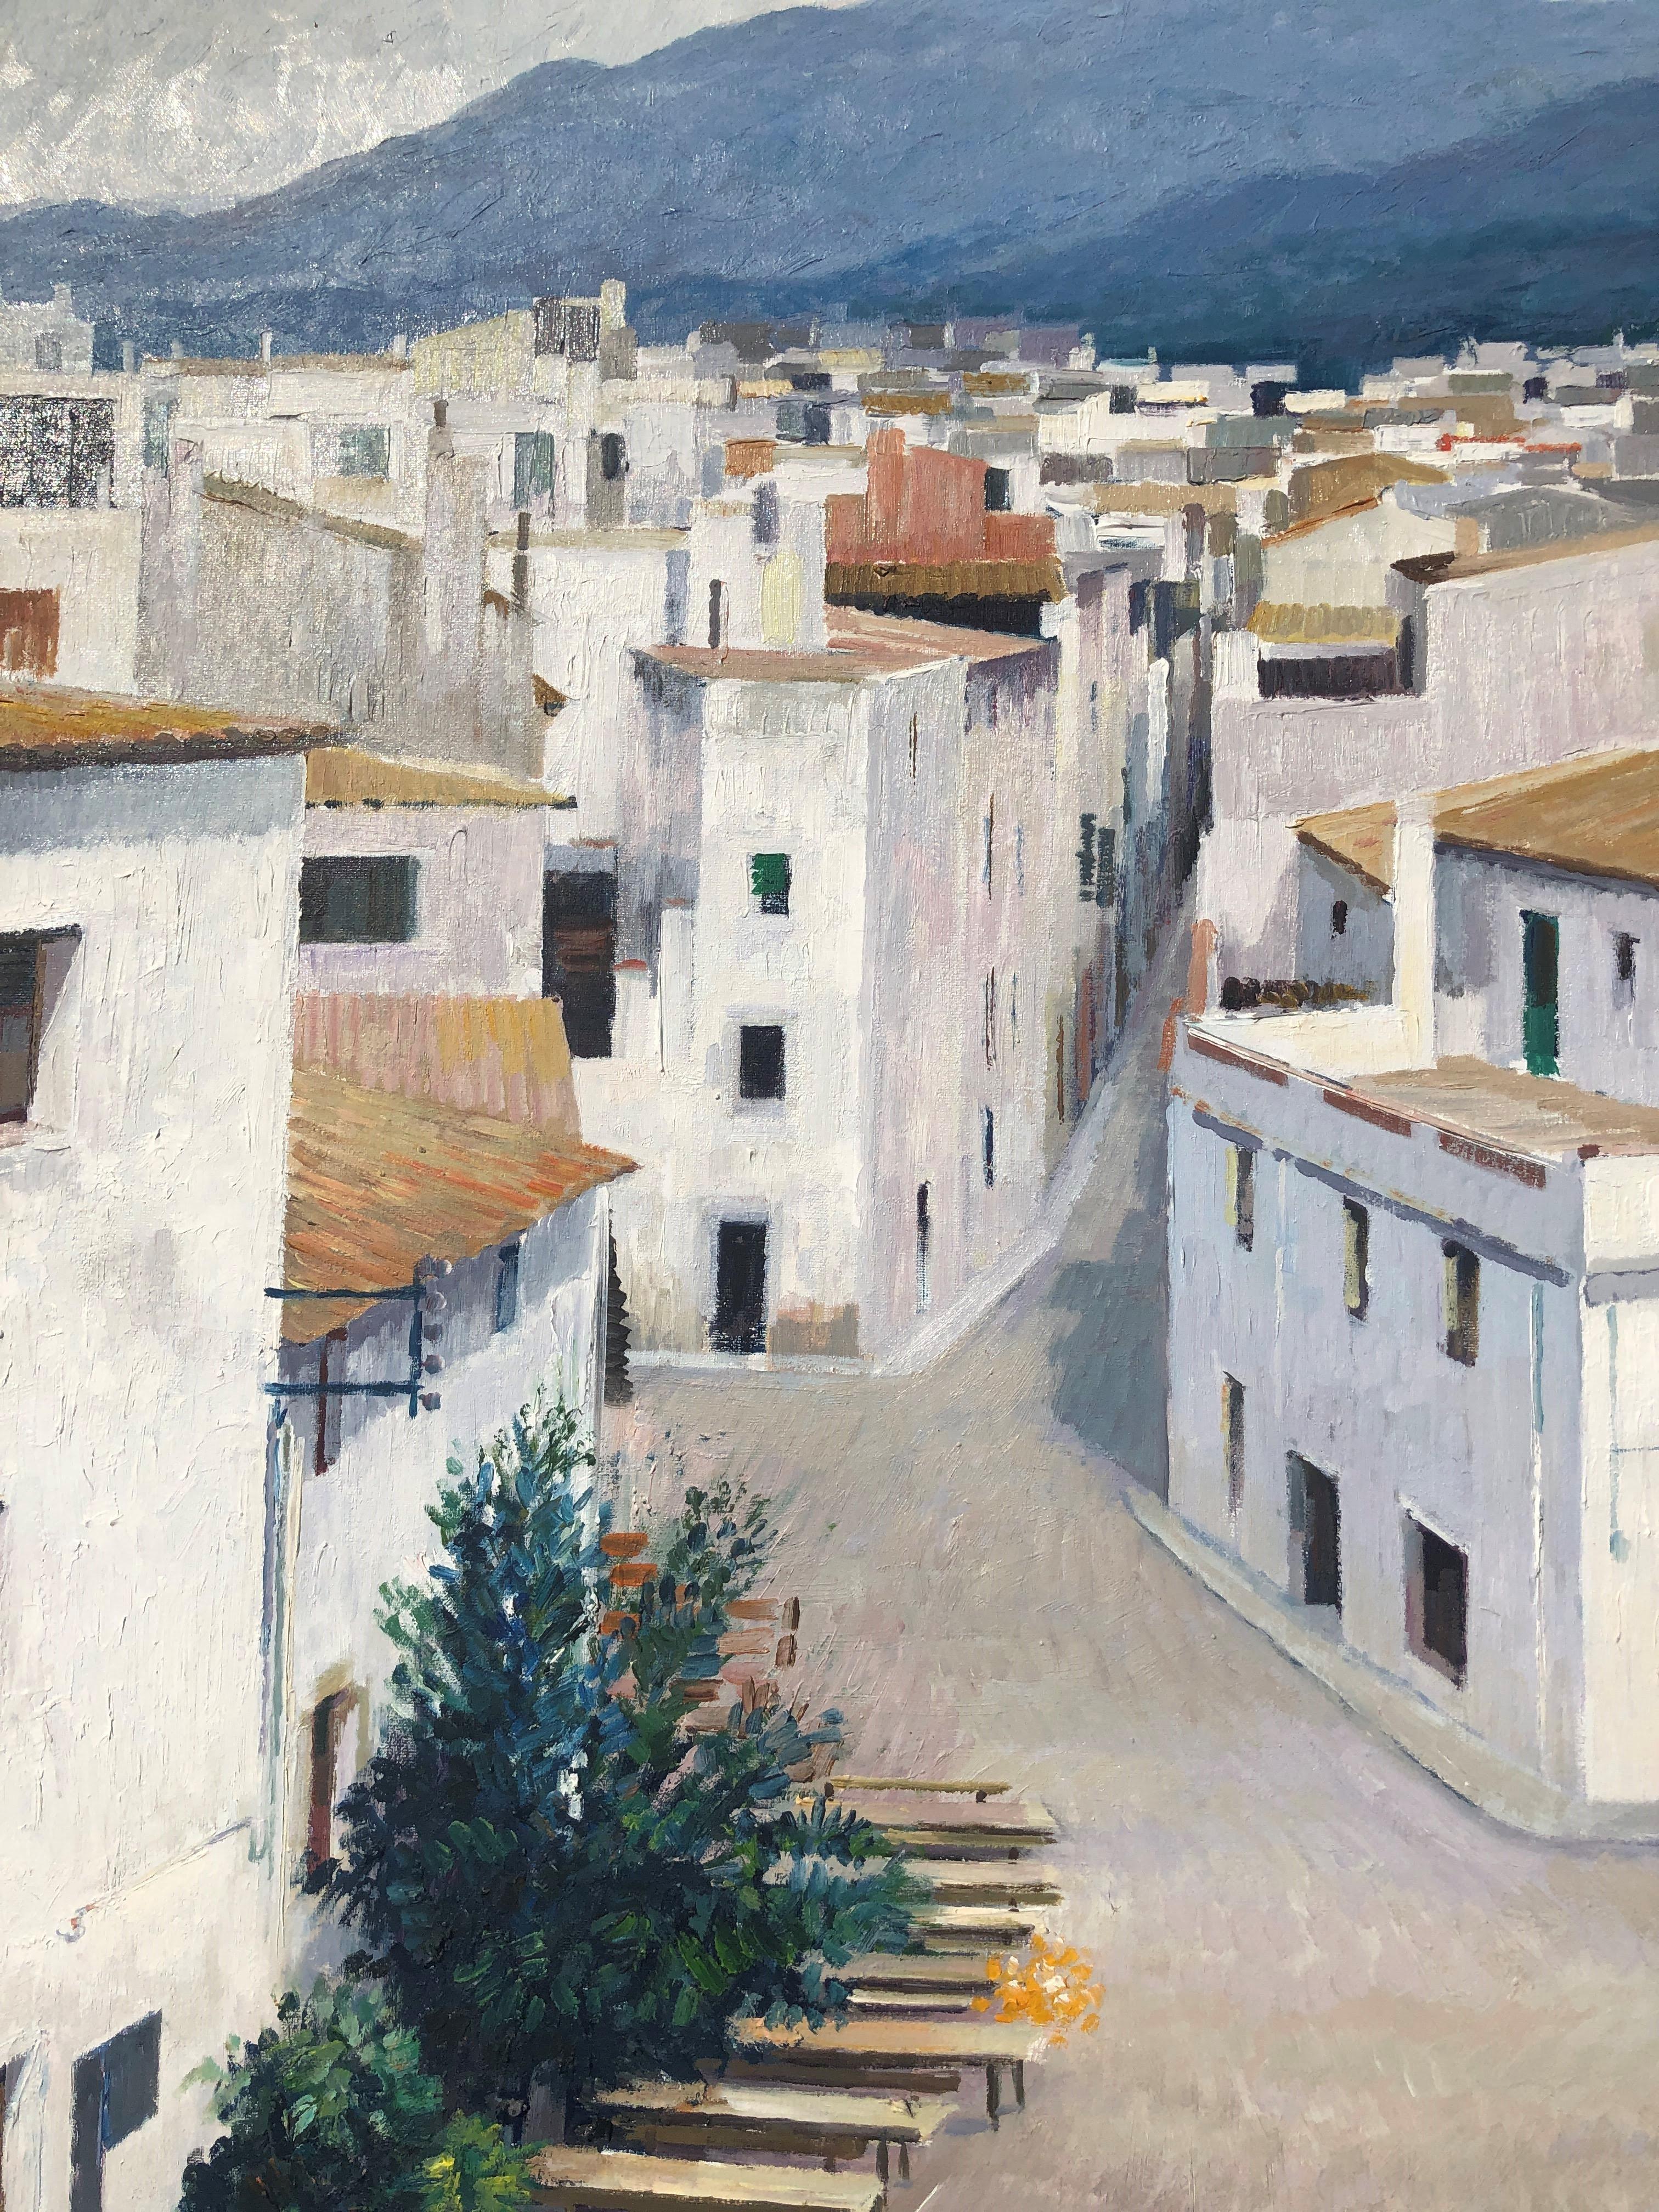 Unframed

Josep Maria Vayreda Canadell
Year of birth: 1932
Biography:
Member of a family spanish saga of artists, which highlighted Joaquim Vayreda, founder of the so-called School Landscape Olot, leaves as a legacy a large collection of oils in